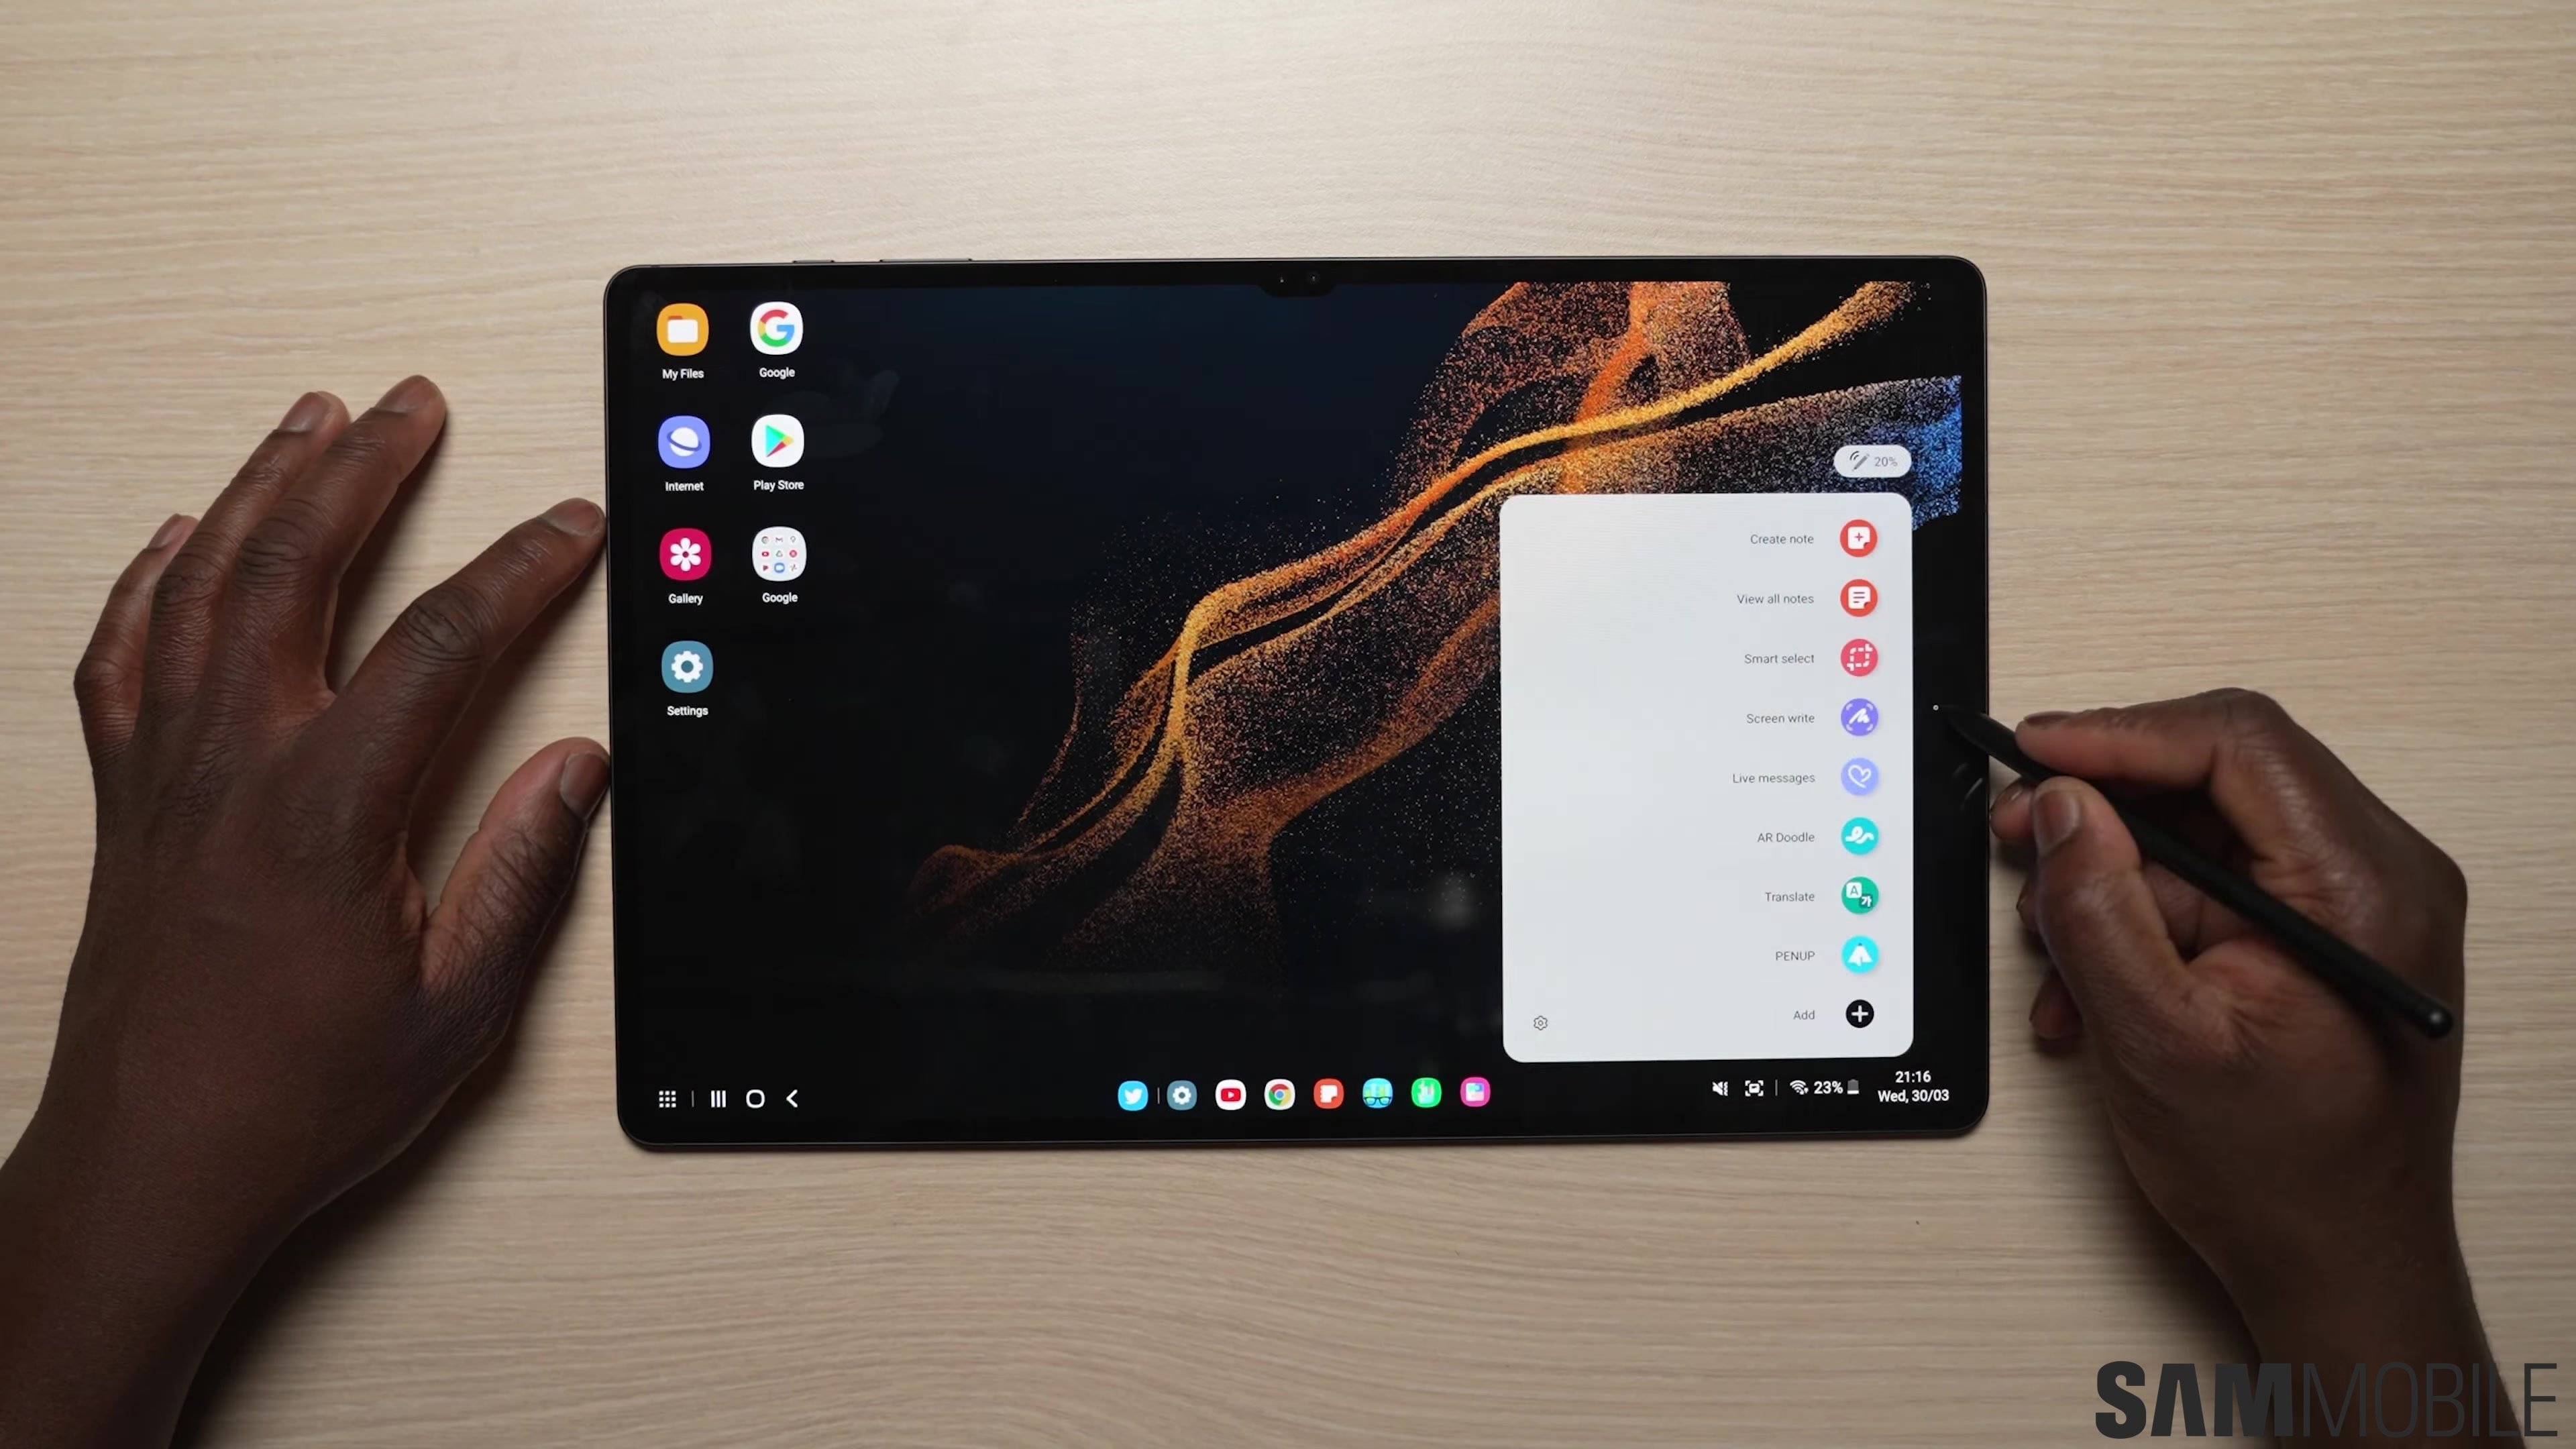 Samsung Galaxy Tab S9 launch has reportedly been postponed - SamMobile